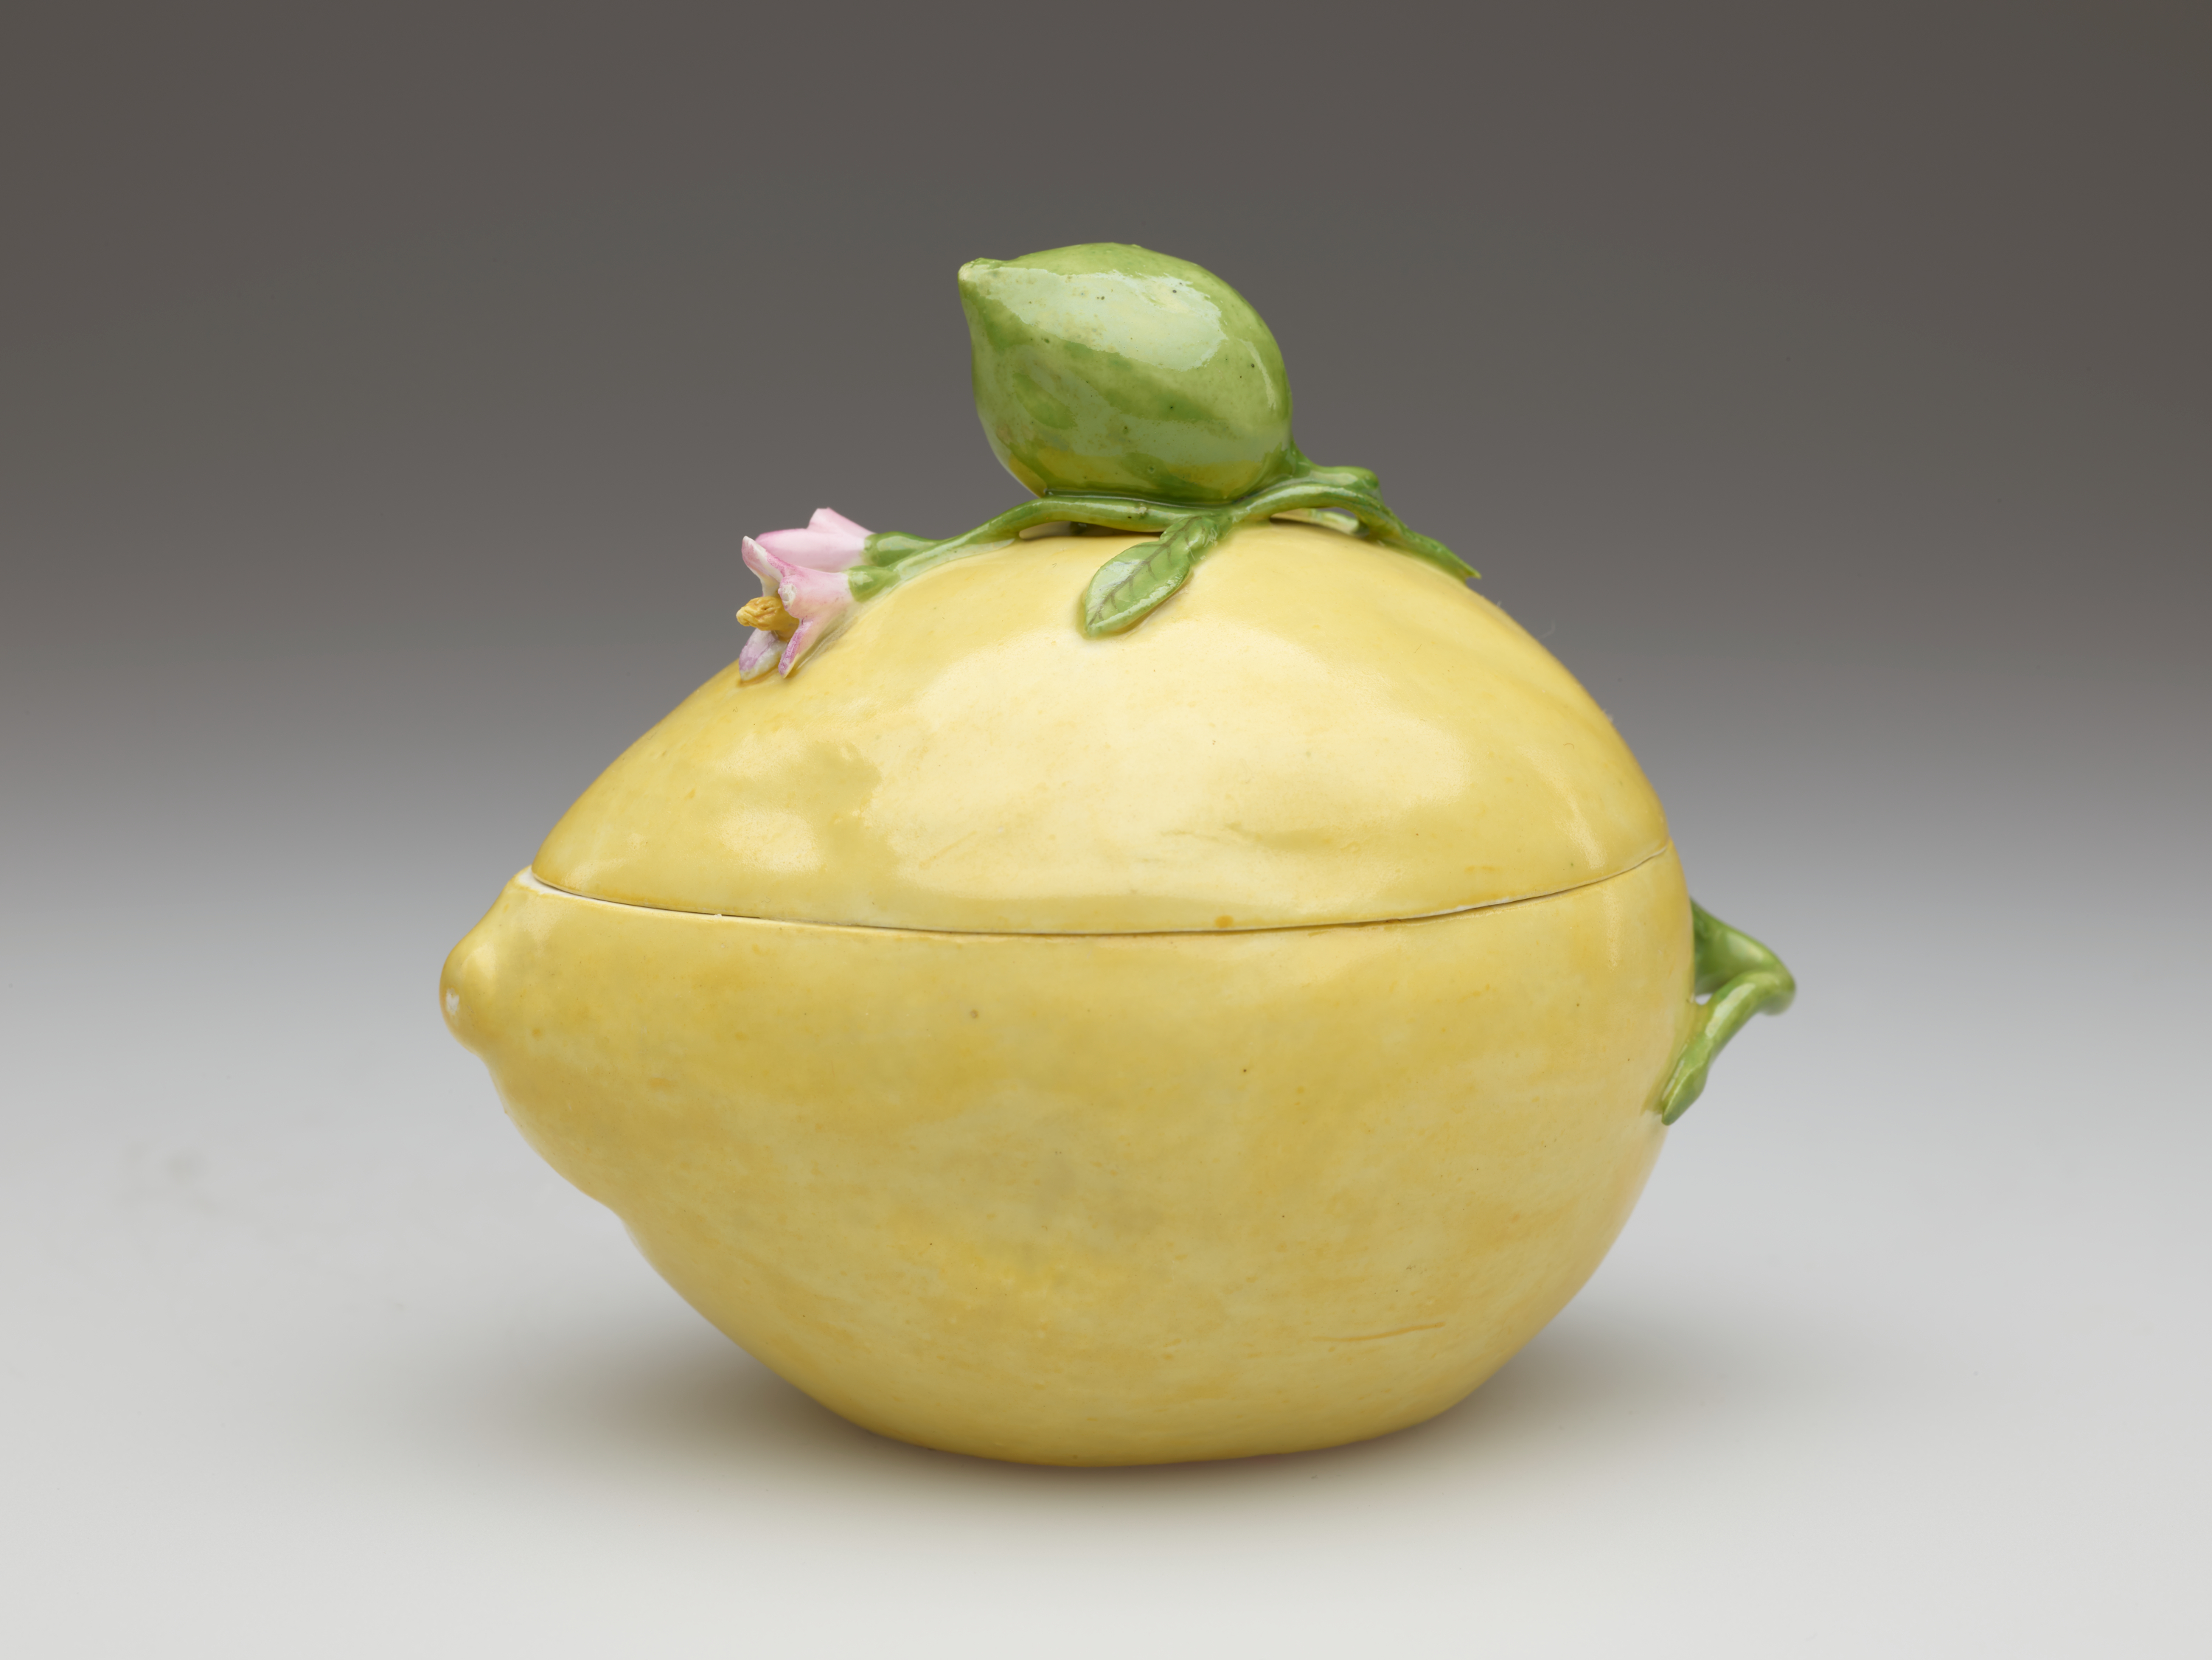 /A%20porcelain%20lemon%20shaped%20box.%20It%20is%20light%20yellow%20and%20has%20sculpted%20floral%20elements%20such%20as%20a%20pink%20flower%20and%20green%20bud.%20%20